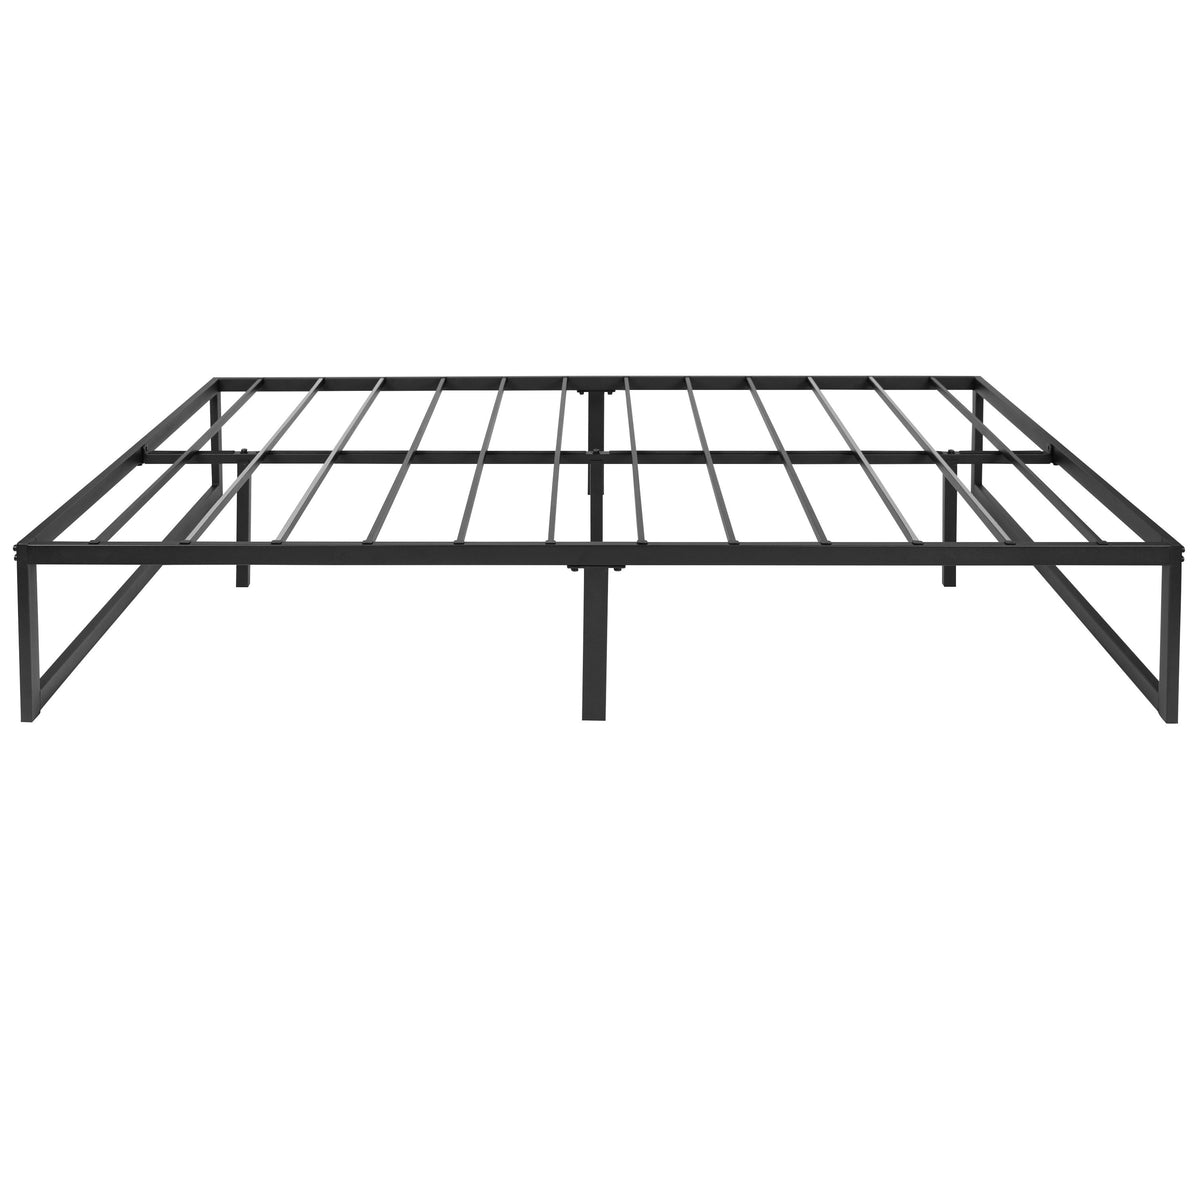 Full |#| 14inch Full Metal Platform Bed Frame with Steel Slat Supports-No Foundation Needed